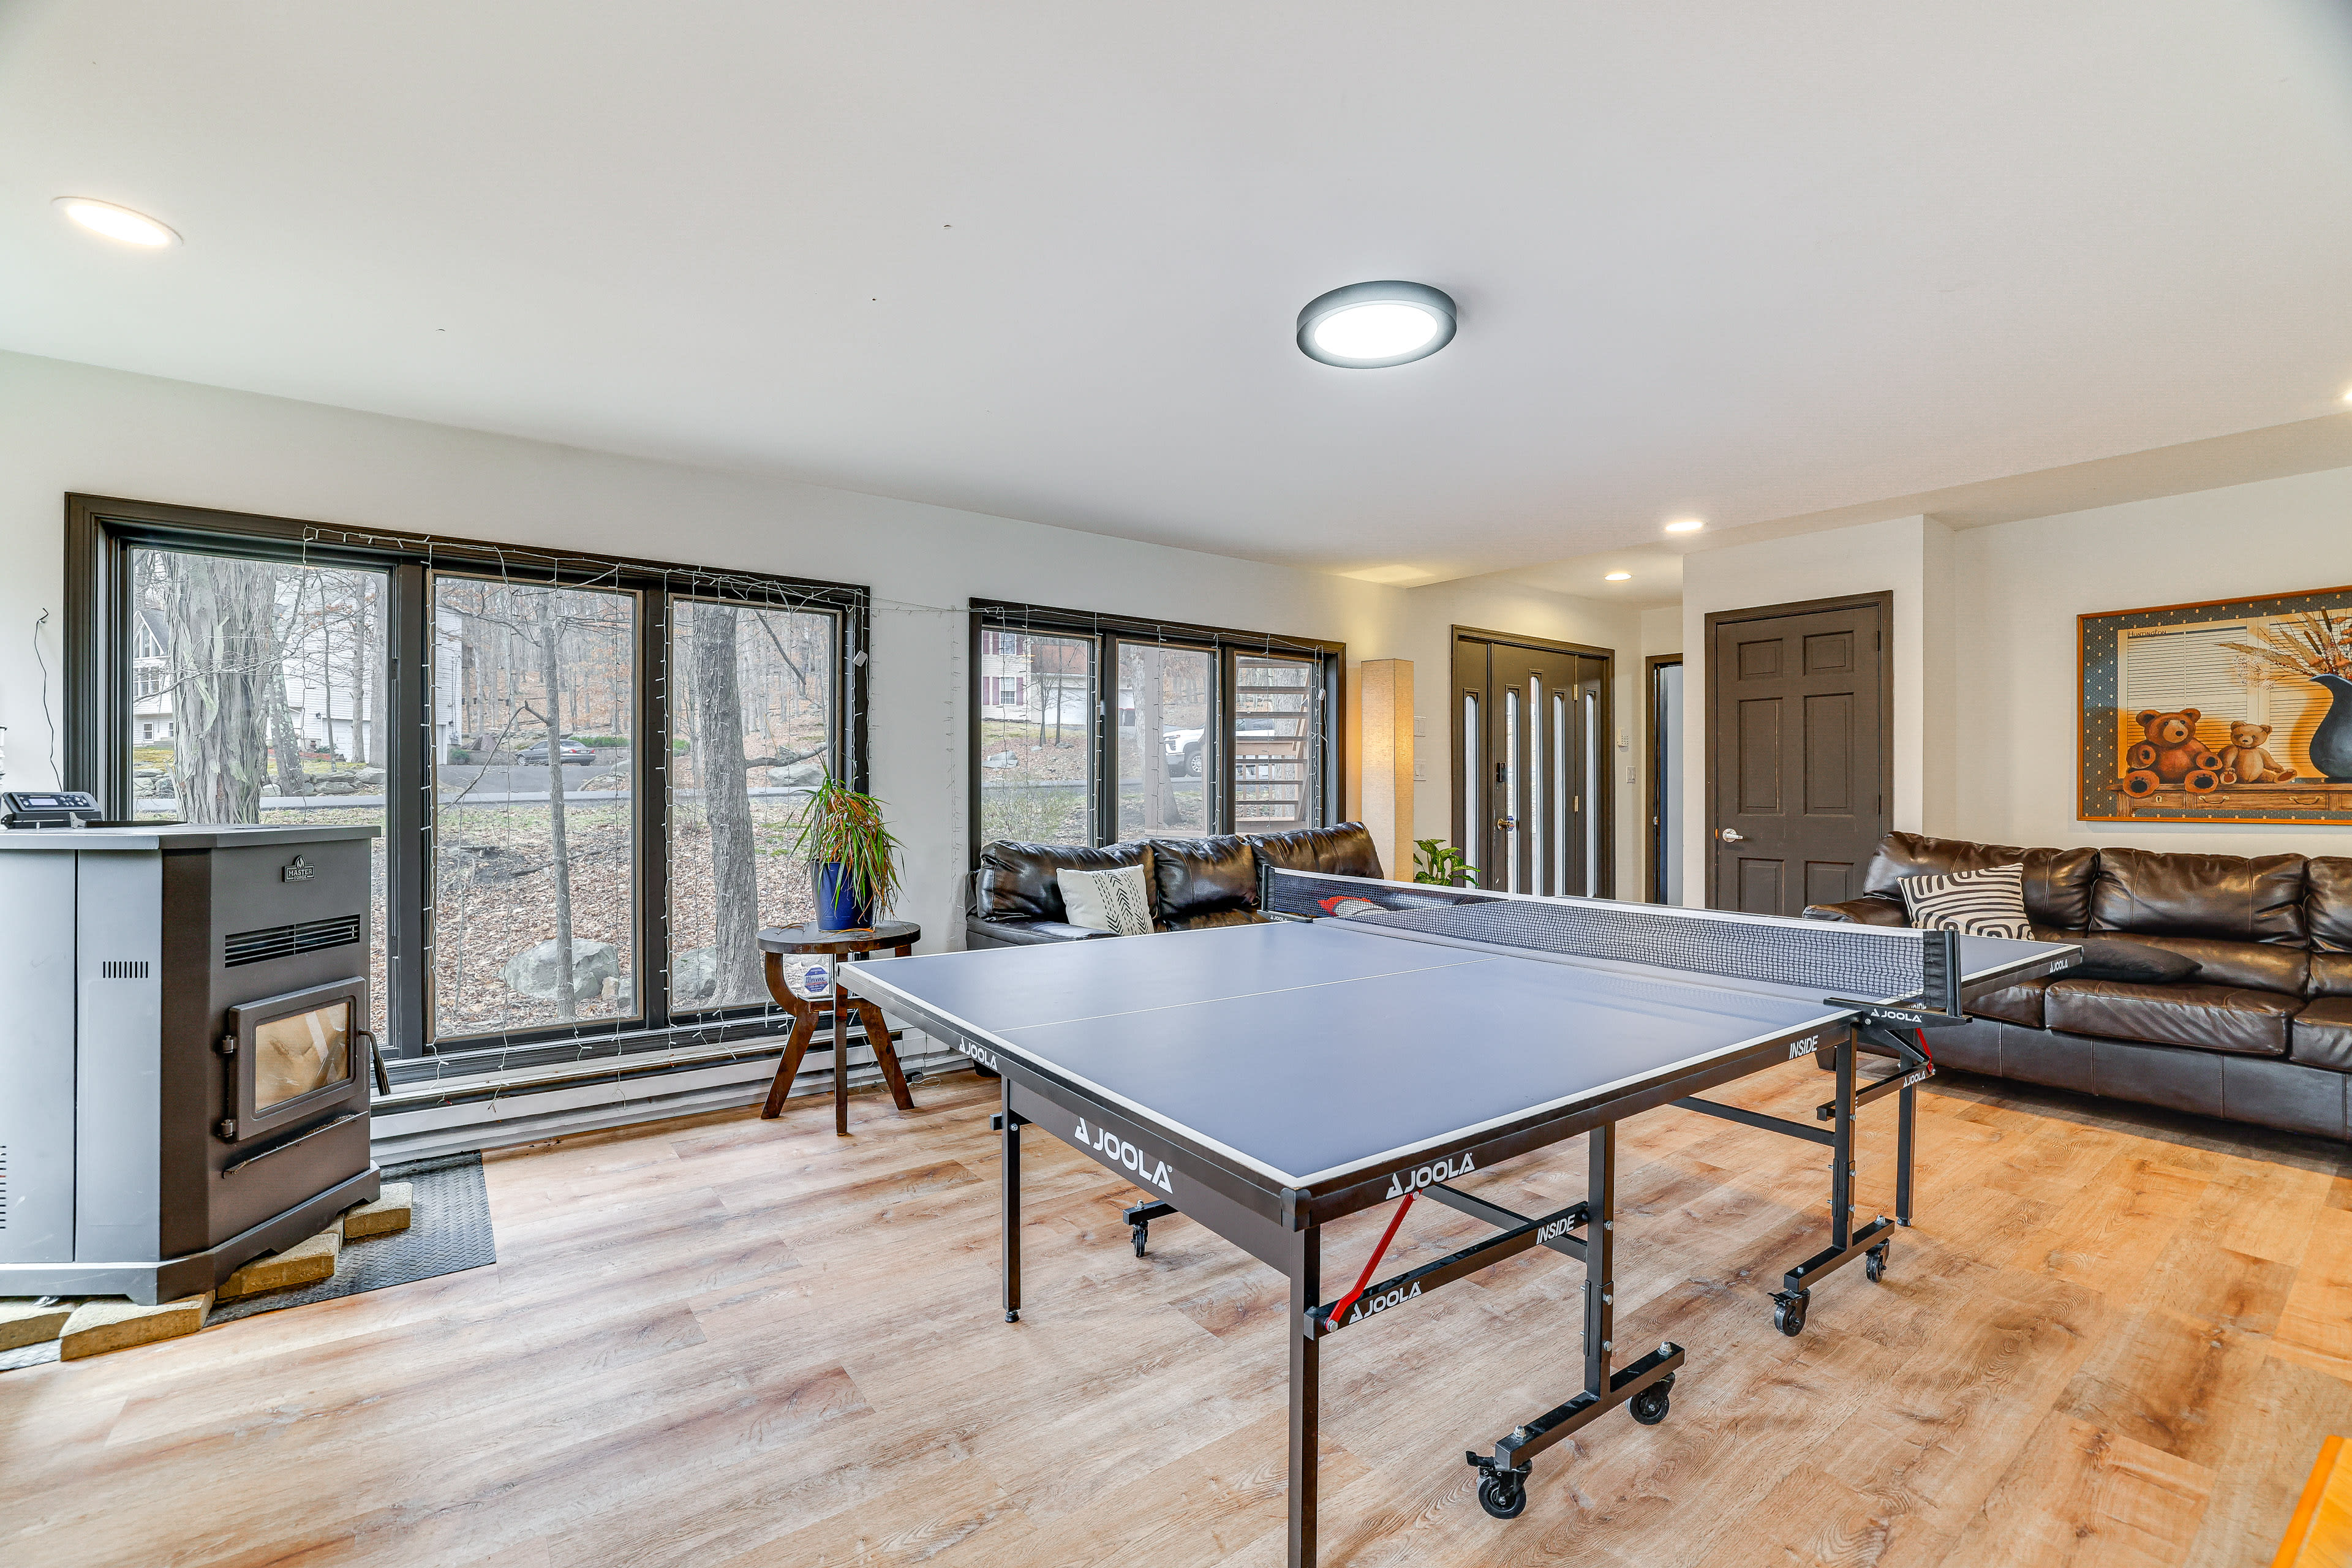 Game Room | 1st Floor | Ping-Pong Table | Wood-Burning Stove